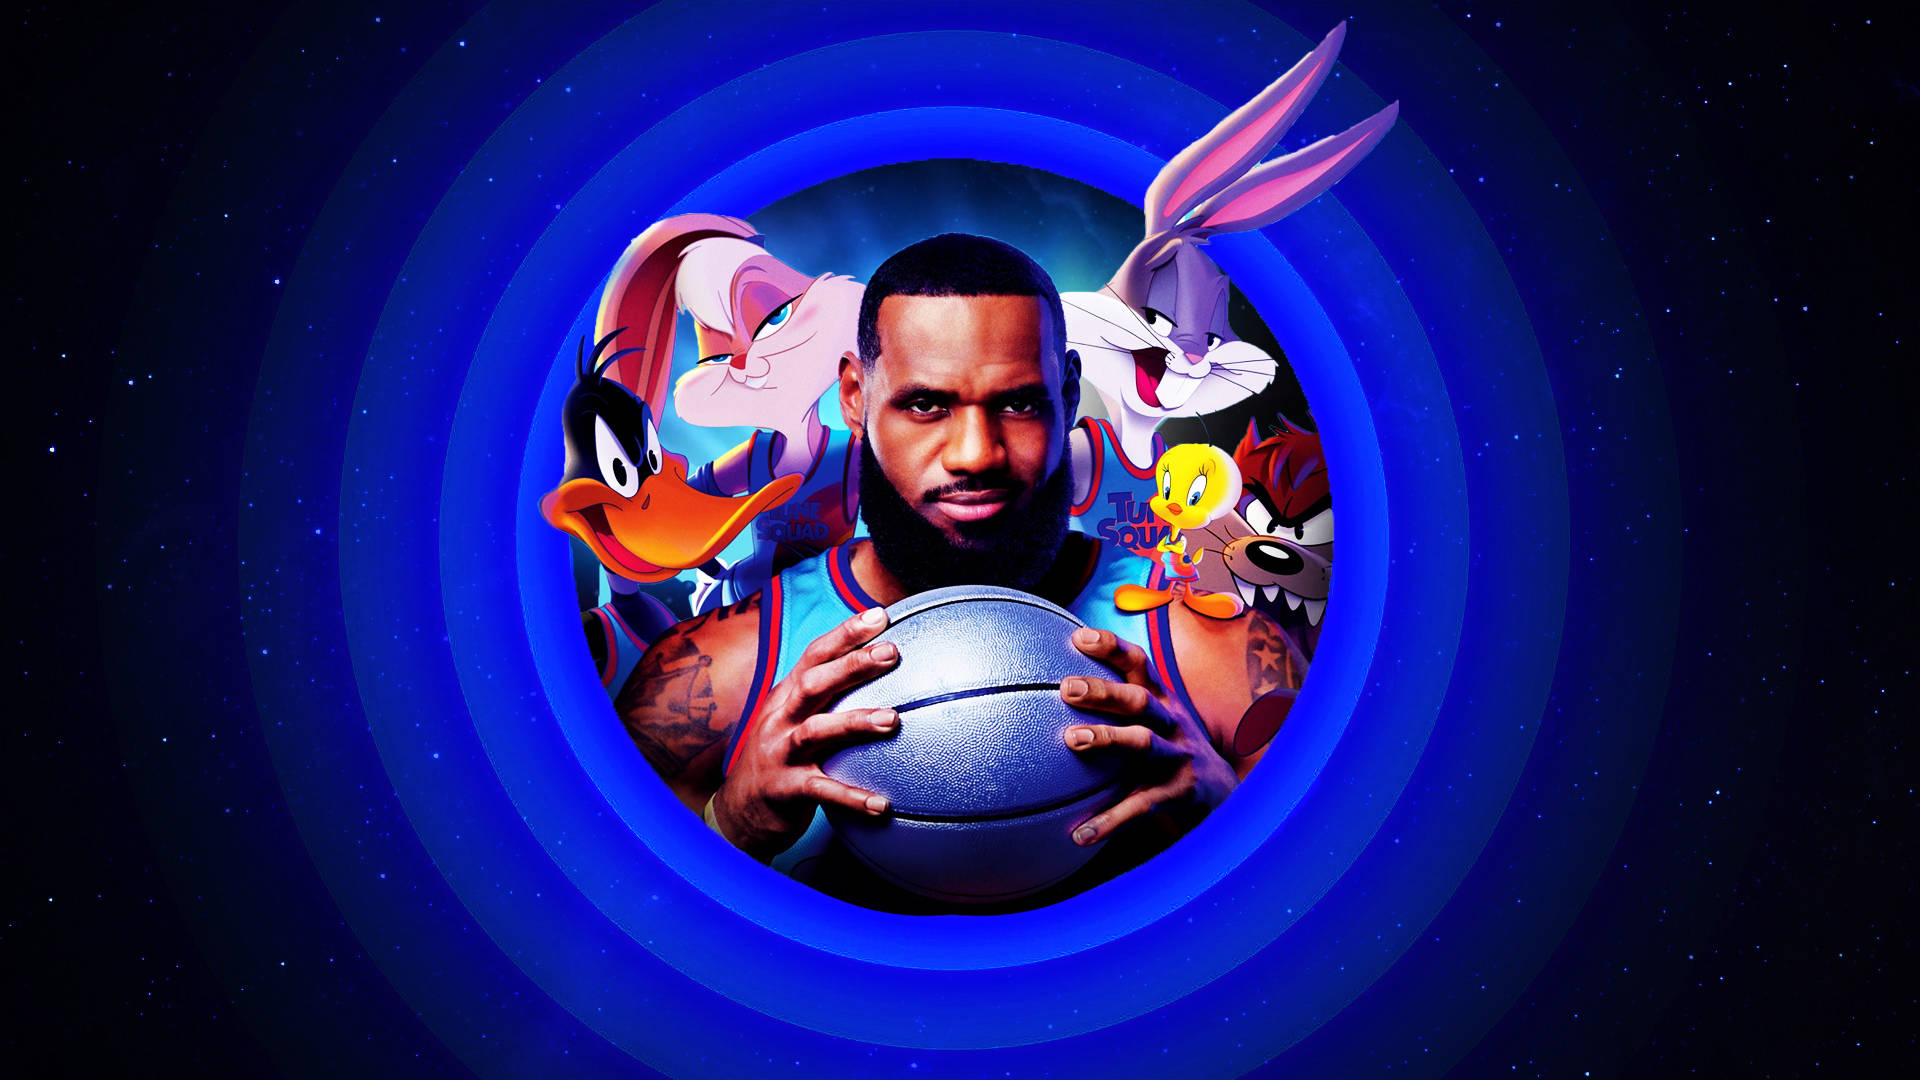 Join LeBron James with The Looney Tunes to save the universe in ‘Space Jam 2’ Wallpaper